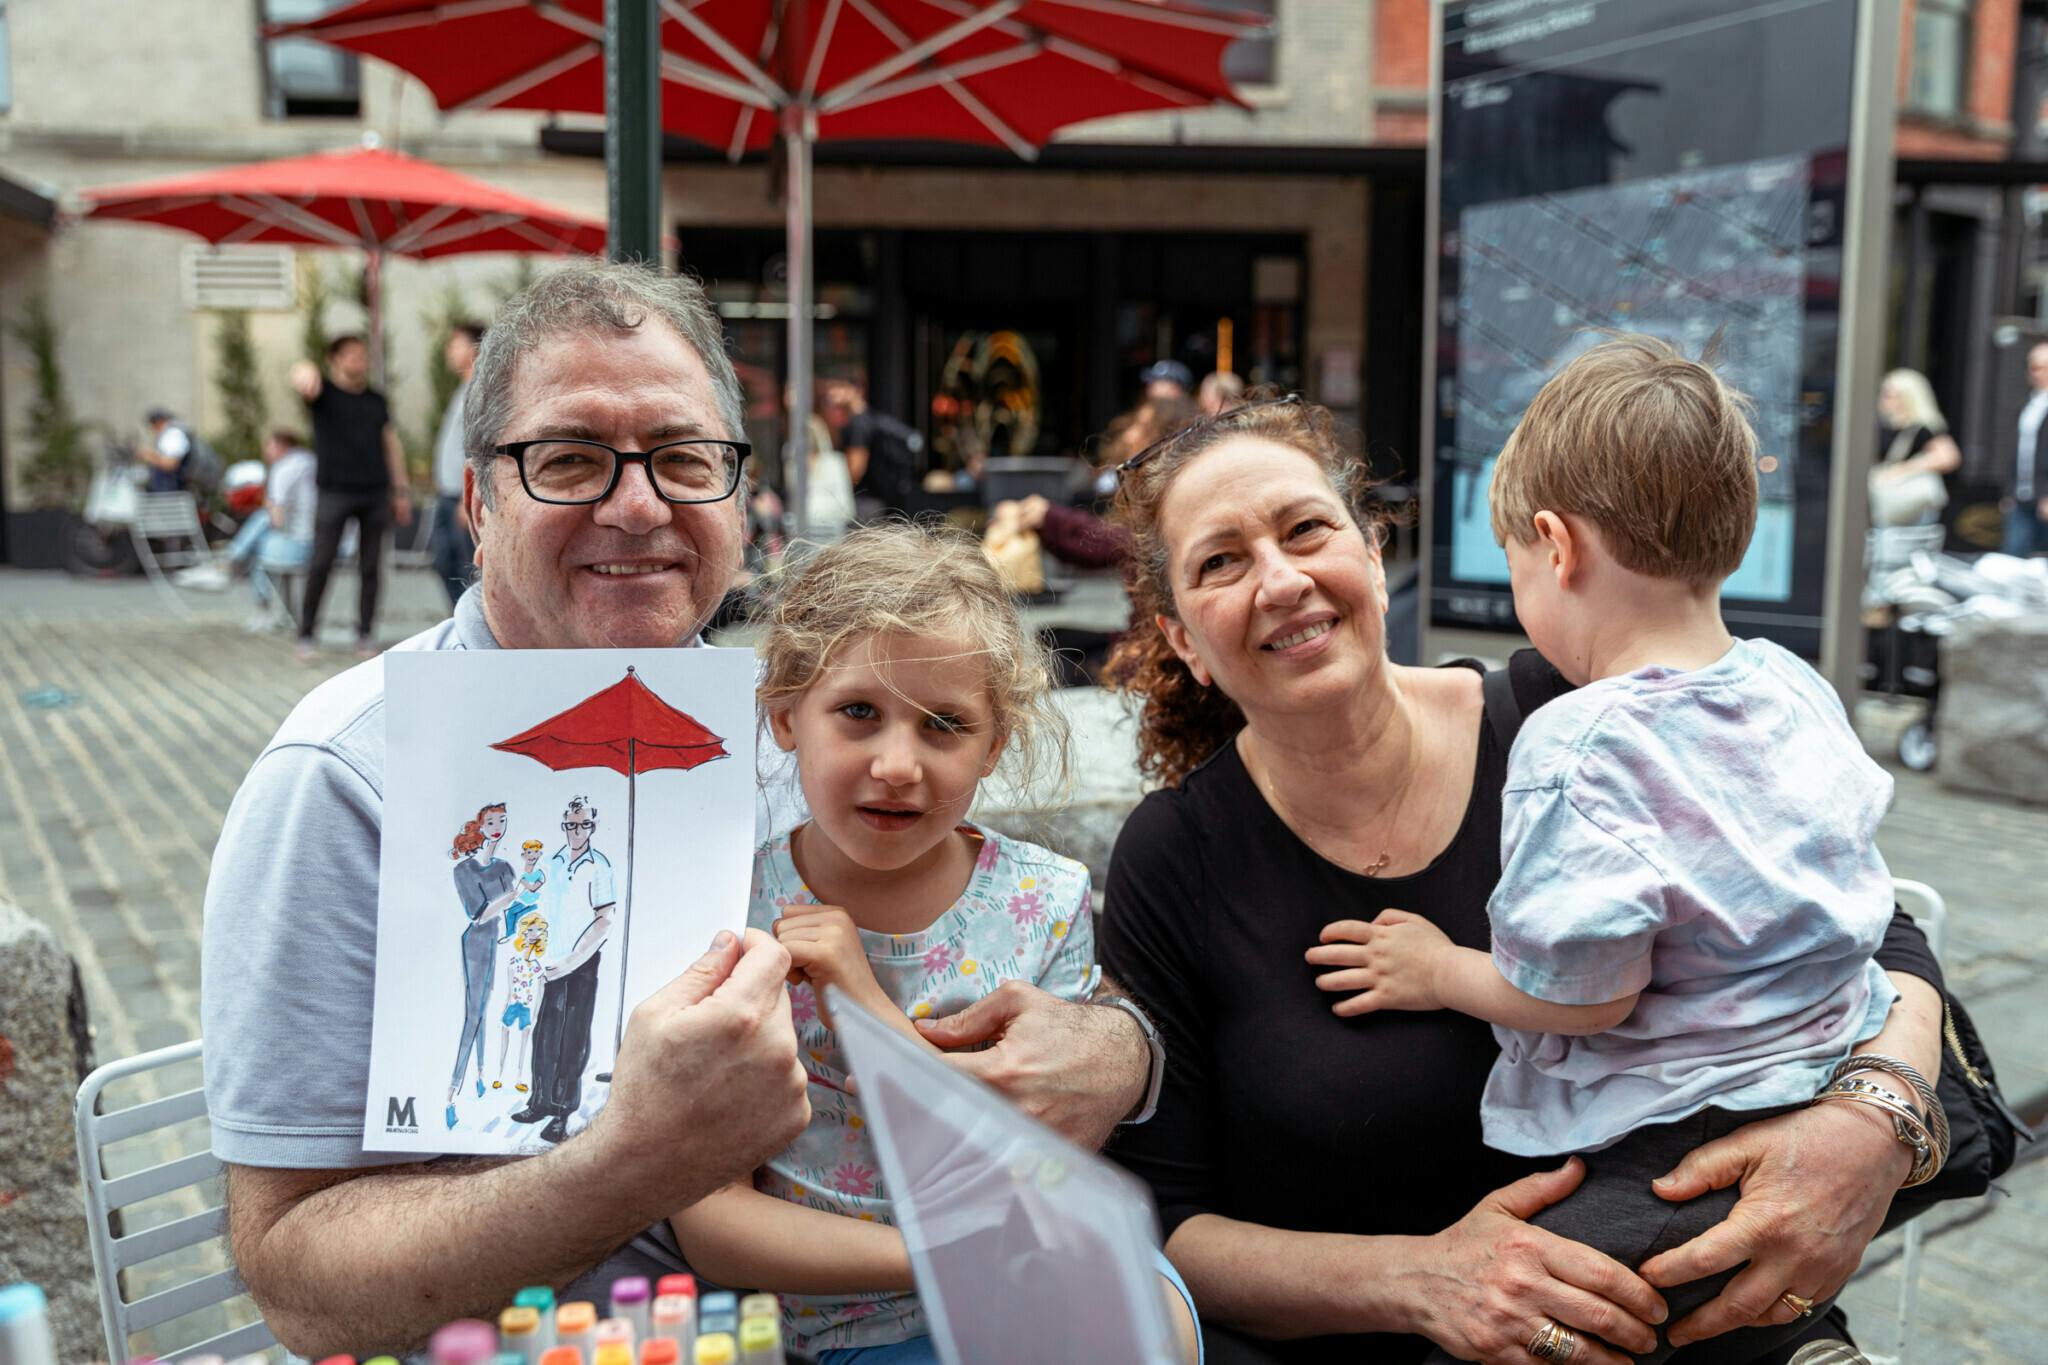 Family with hand-sketched portrait in the Meatpacking District